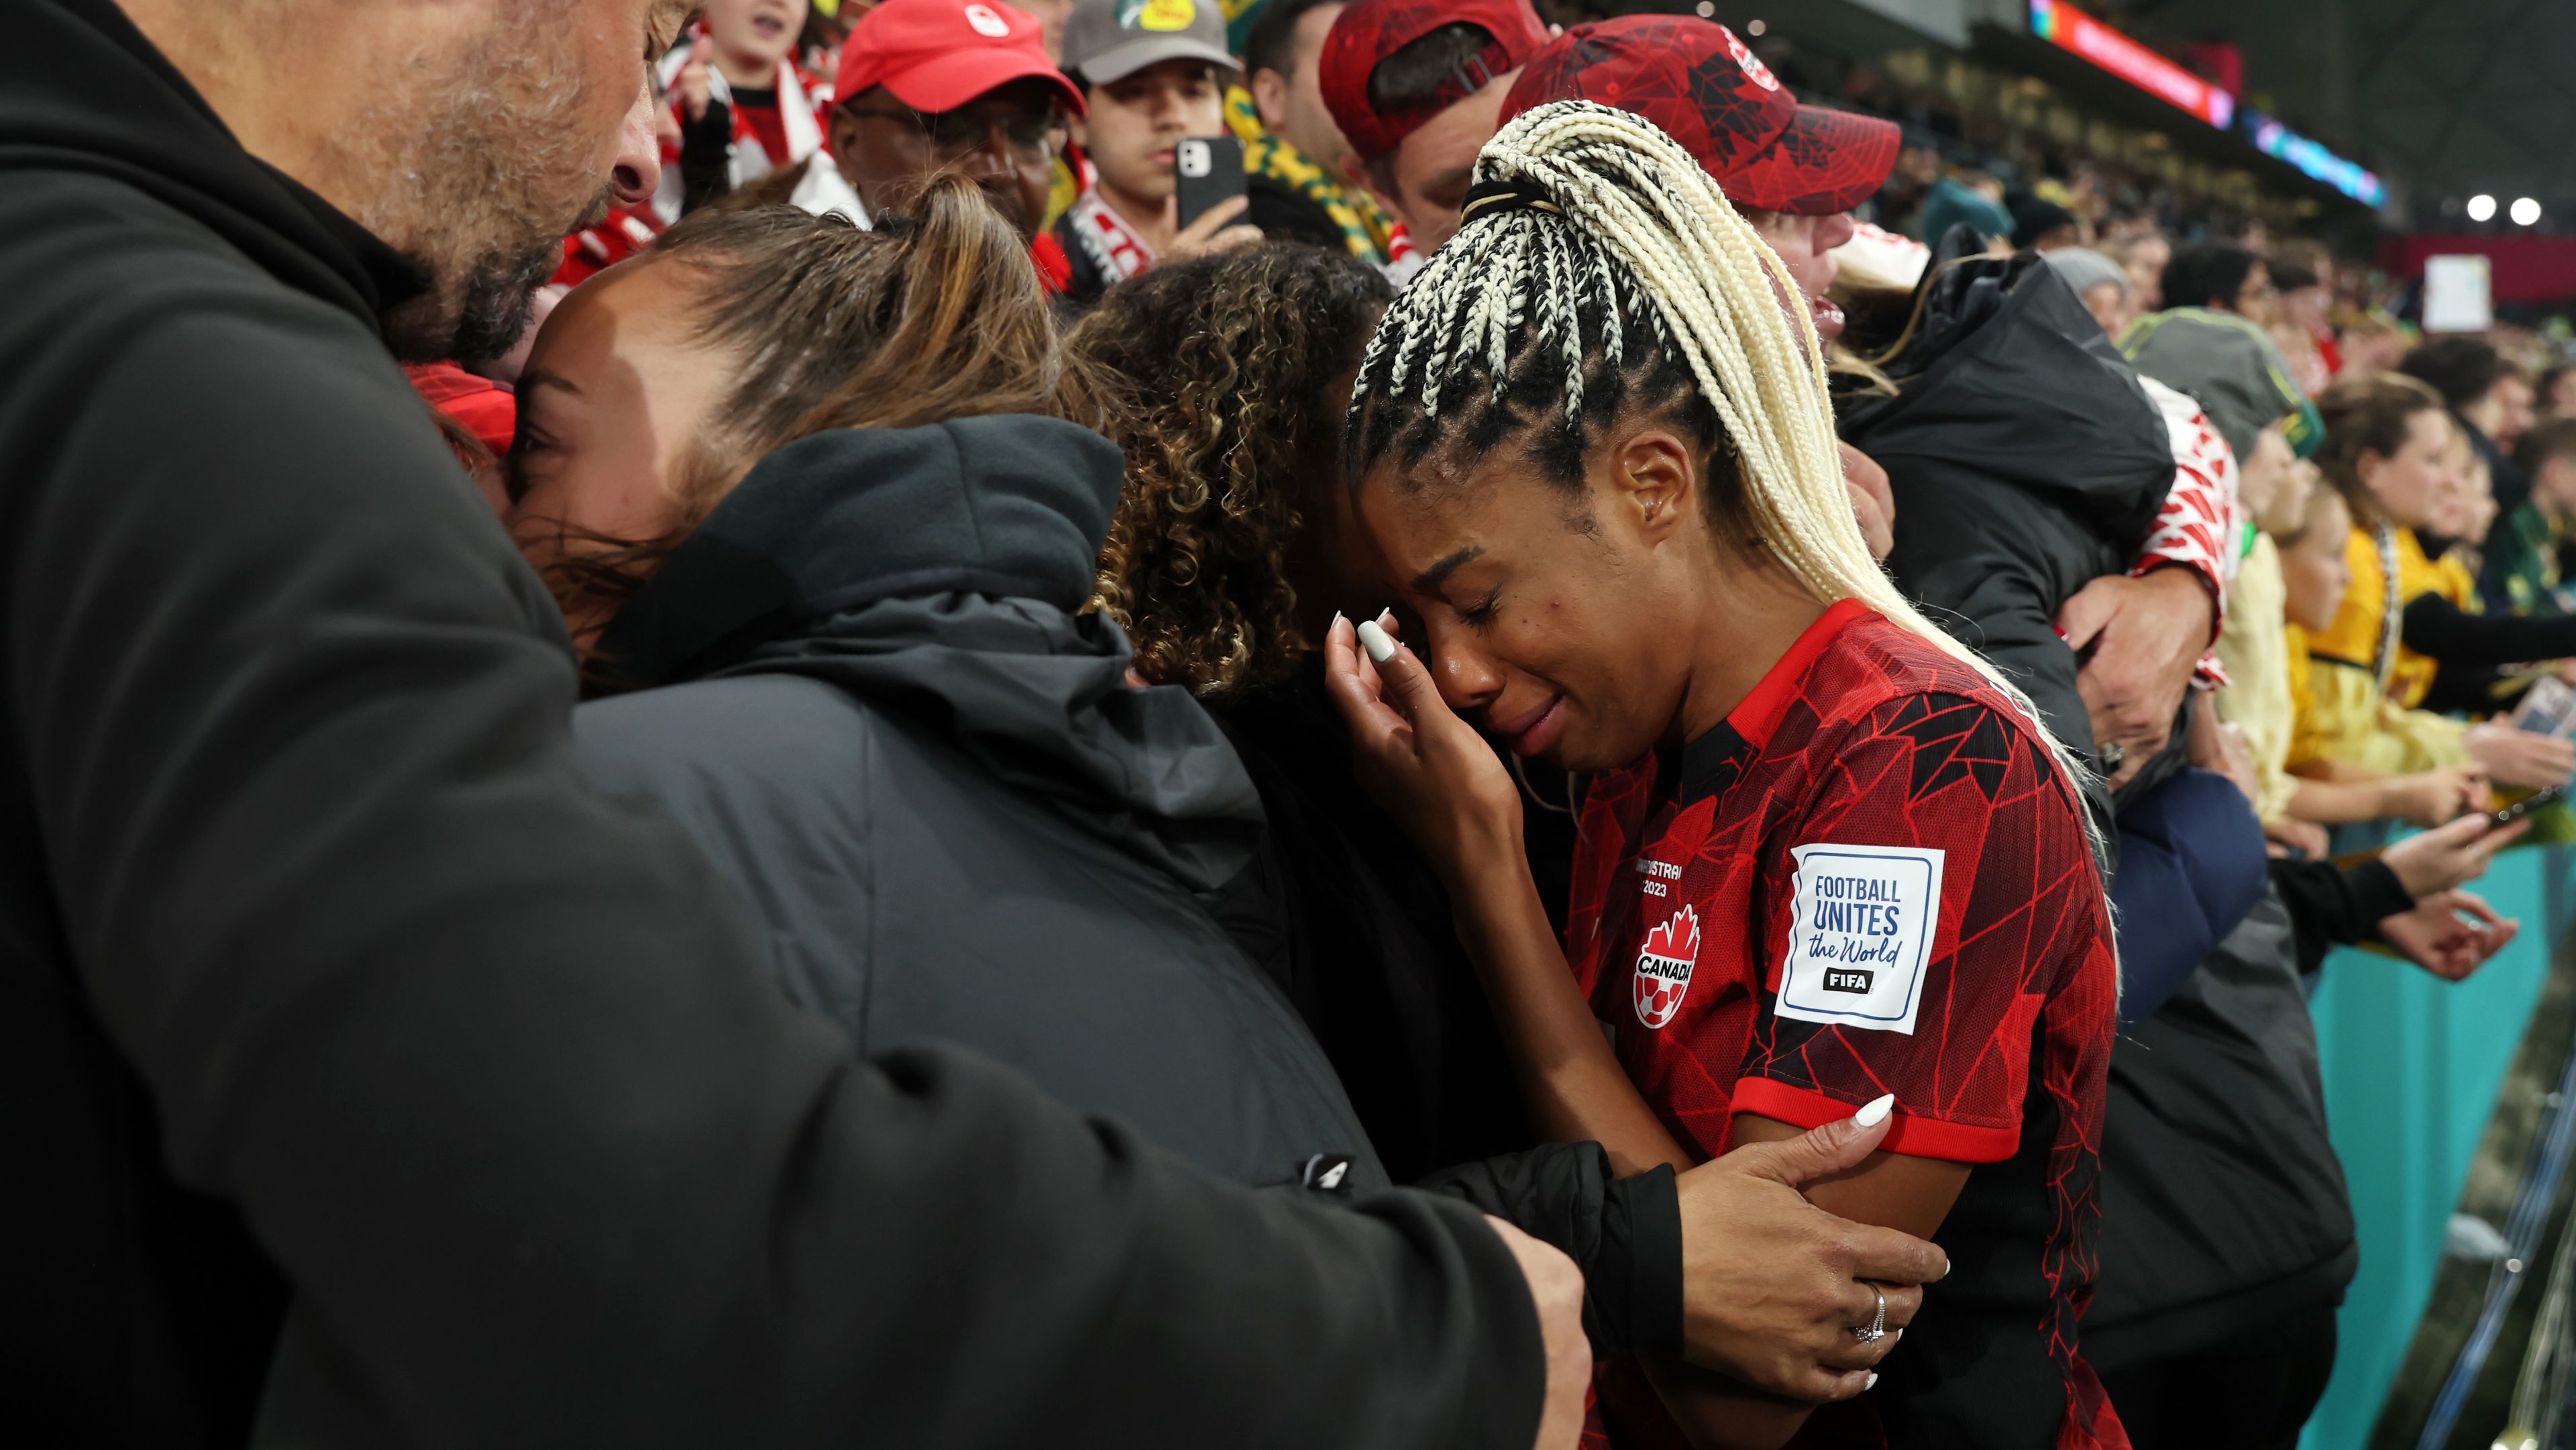 MELBOURNE, AUSTRALIA - JULY 31: Ashley Lawrence of Canada is consoled by her family after the team&#x27;s 0-4 defeat and elimination from the tournament following the FIFA Women&#x27;s World Cup Australia &amp; New Zealand 2023 Group B match between Canada and Australia at Melbourne Rectangular Stadium on July 31, 2023 in Melbourne / Naarm, Australia. (Photo by Alex Grimm - FIFA/FIFA via Getty Images)